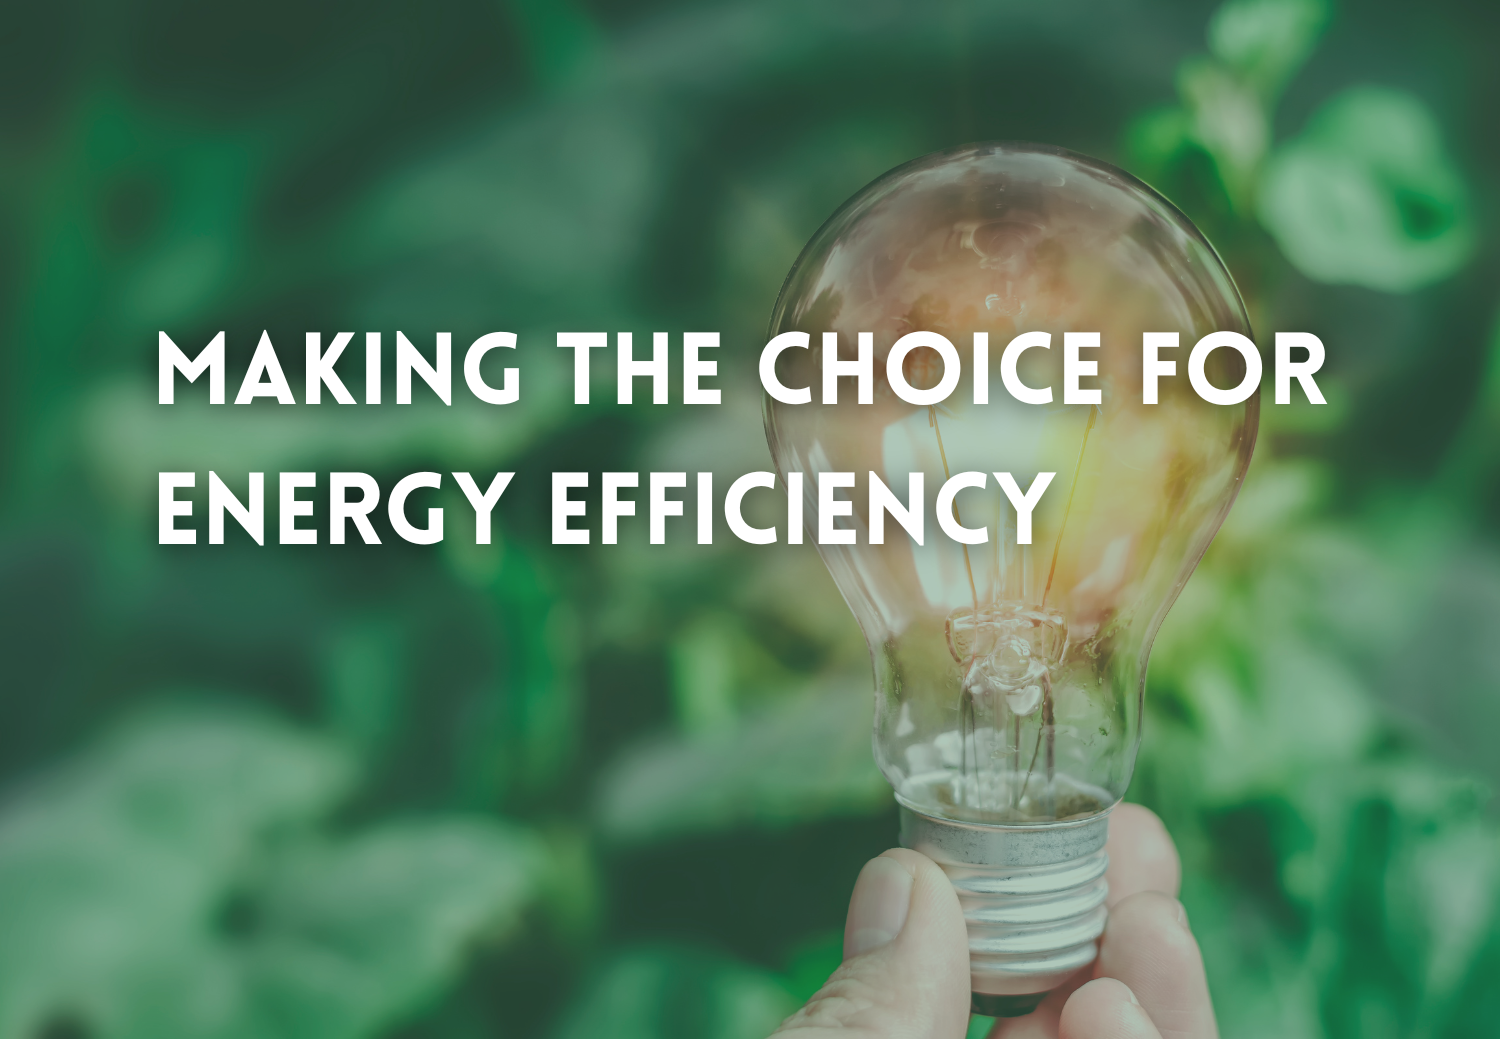 Making the Choice for Energy Efficiency